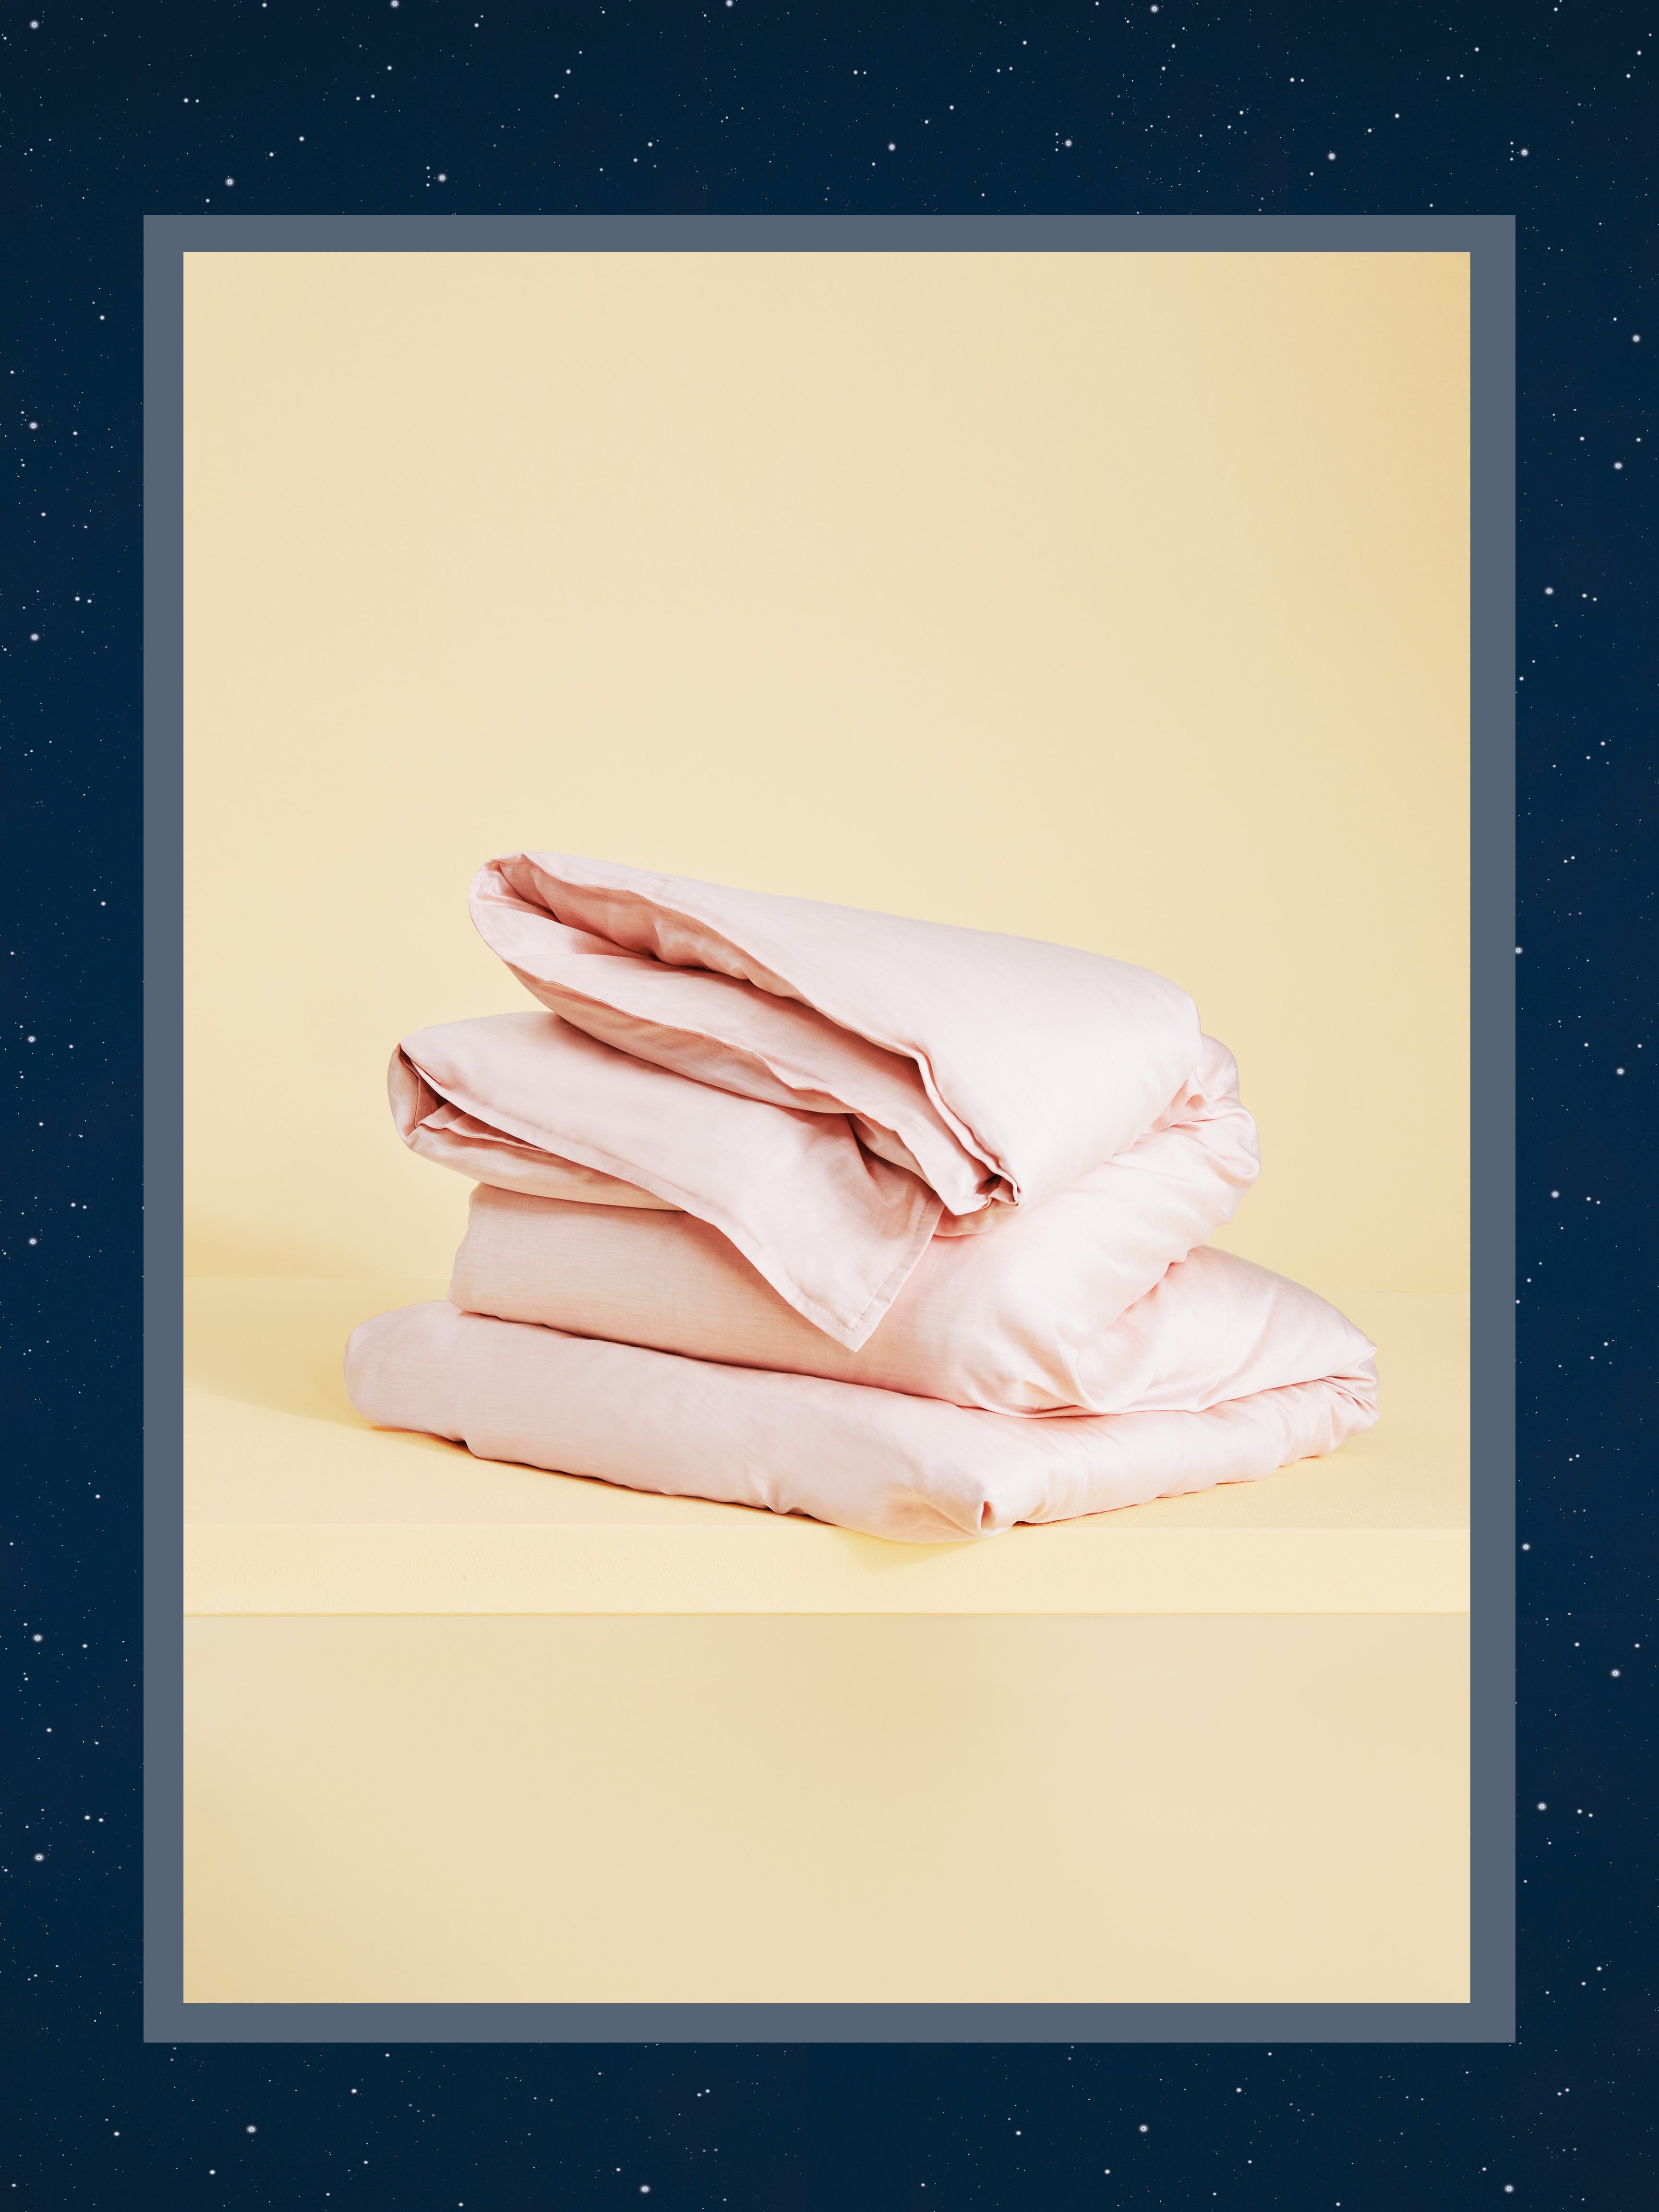 The Coolest New Sheets Are Made with Ultrasonic Tech and Natural Dyes